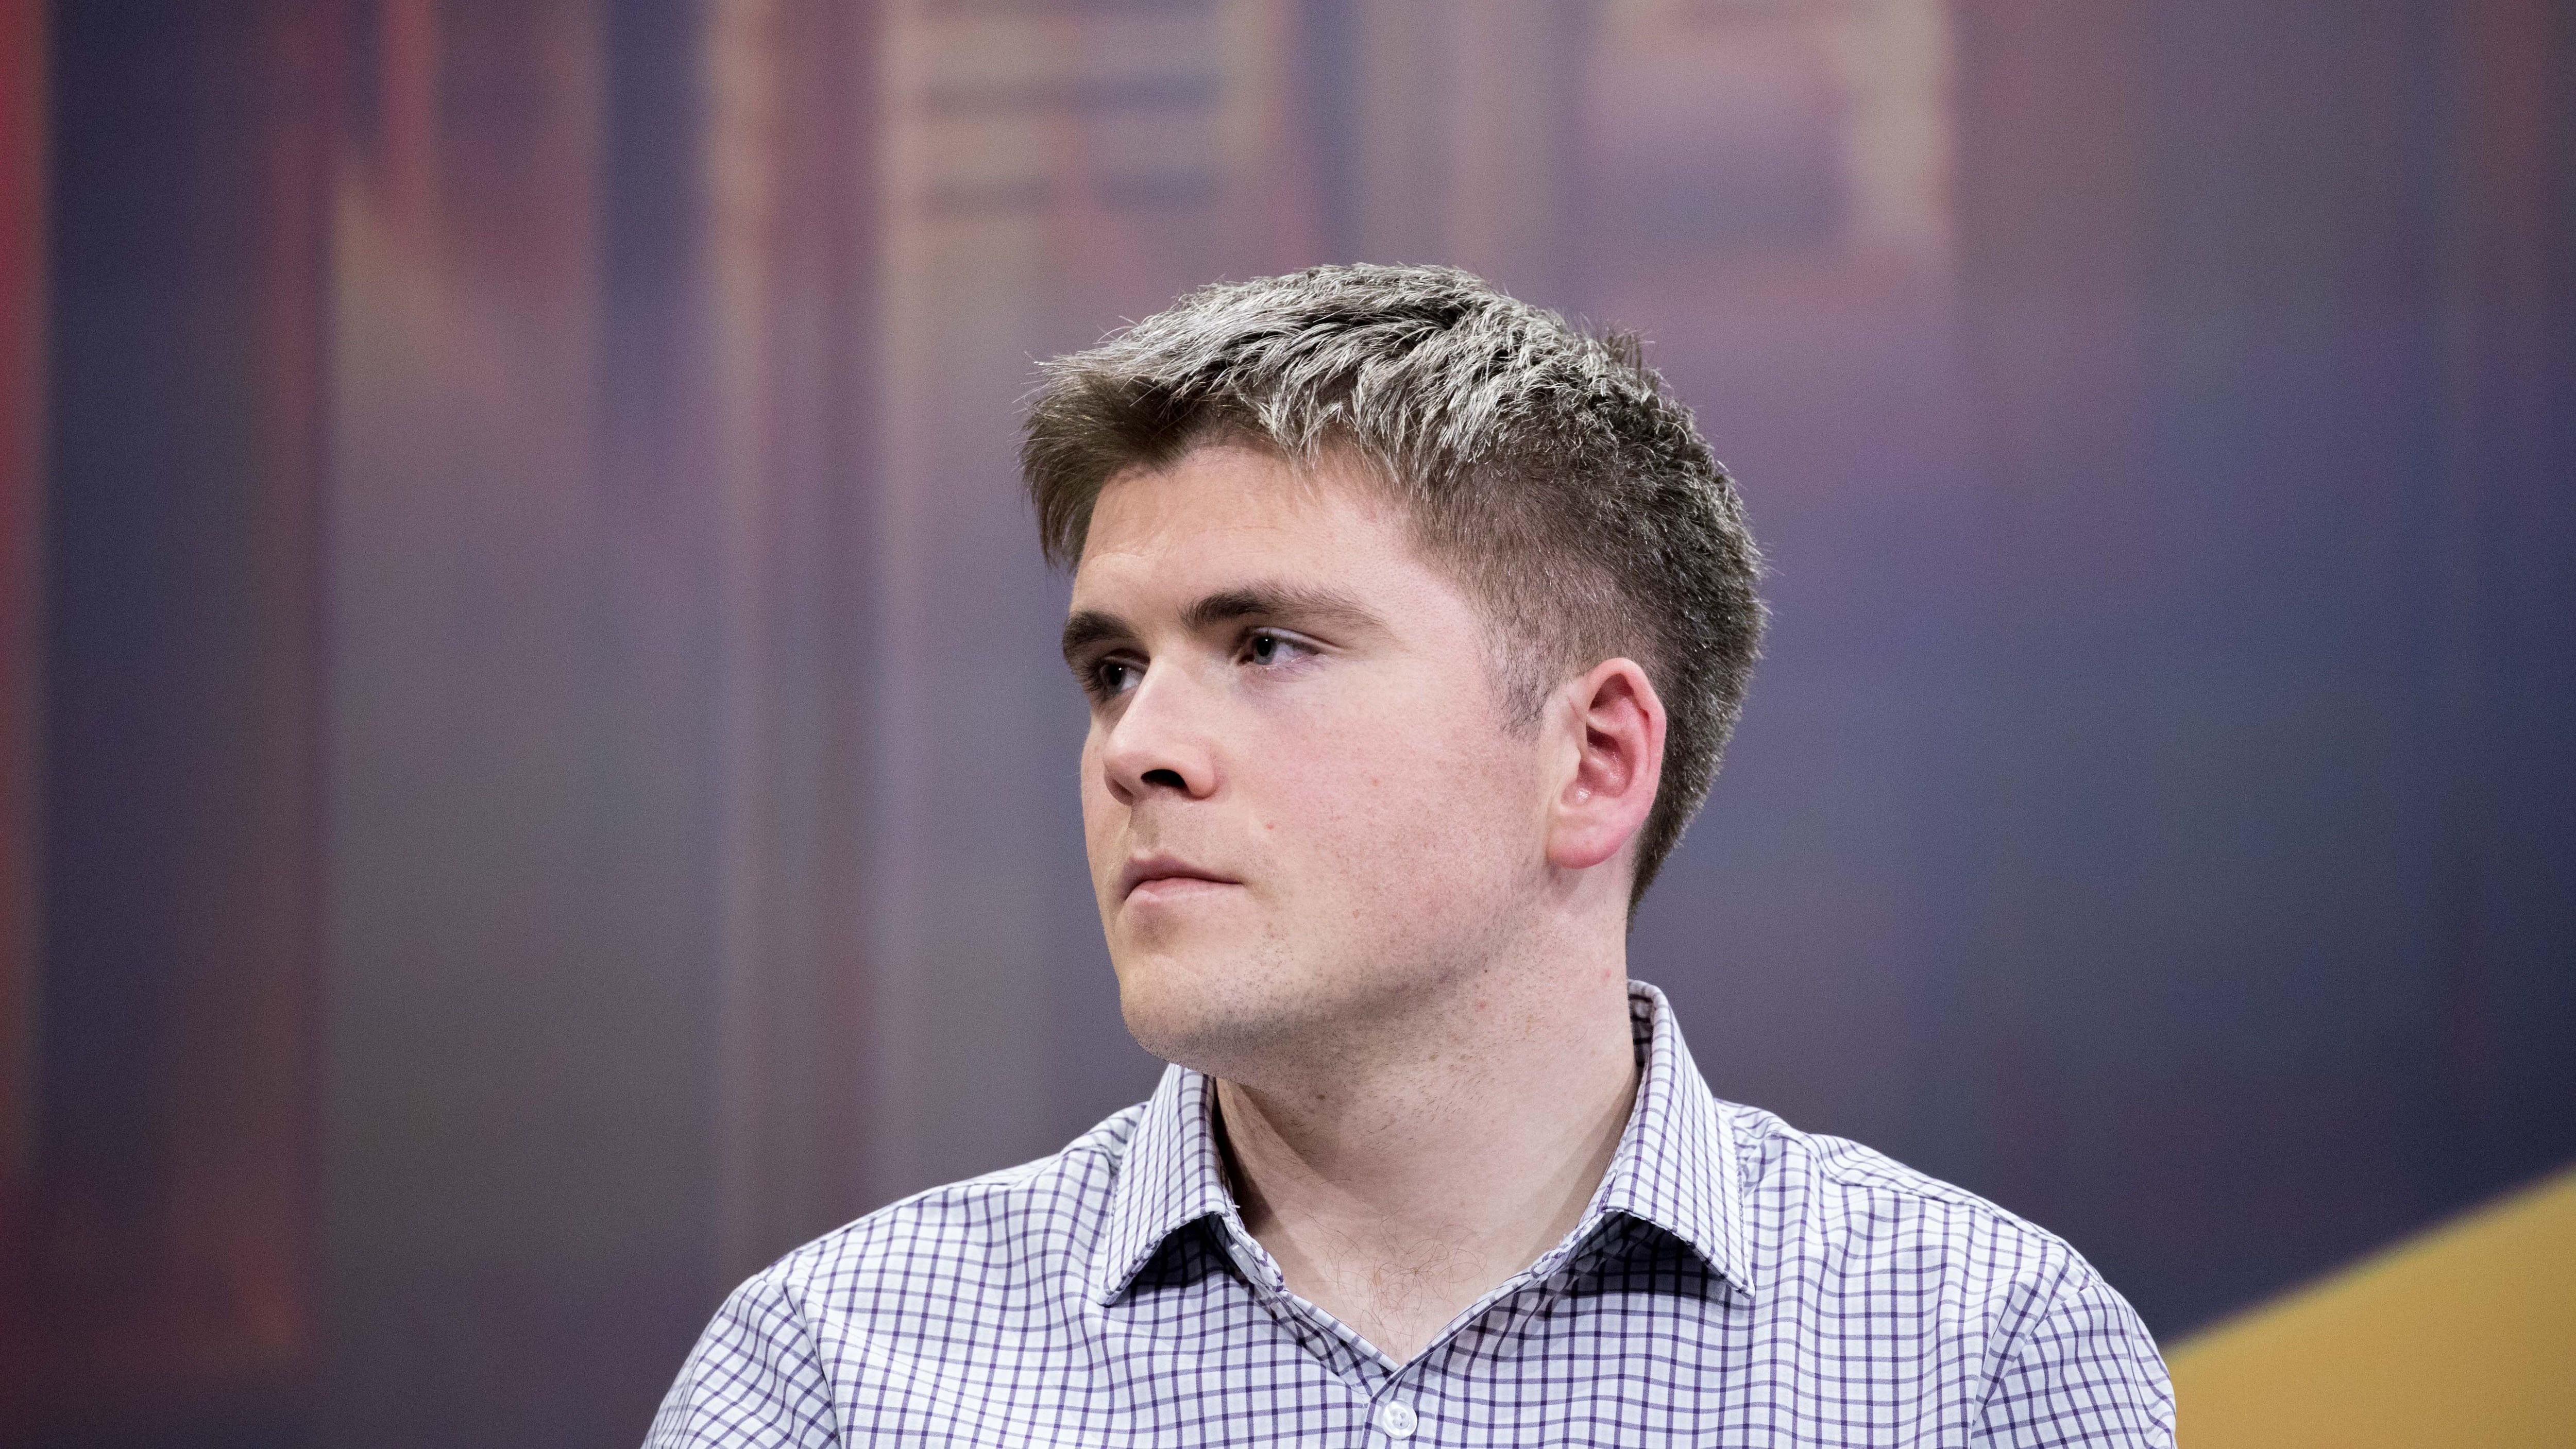 Stripe co-founder and President John Collison said, "crypto is finding real utility," in a keynote on Thursday. (Christophe Morin/IP3/Getty Images)